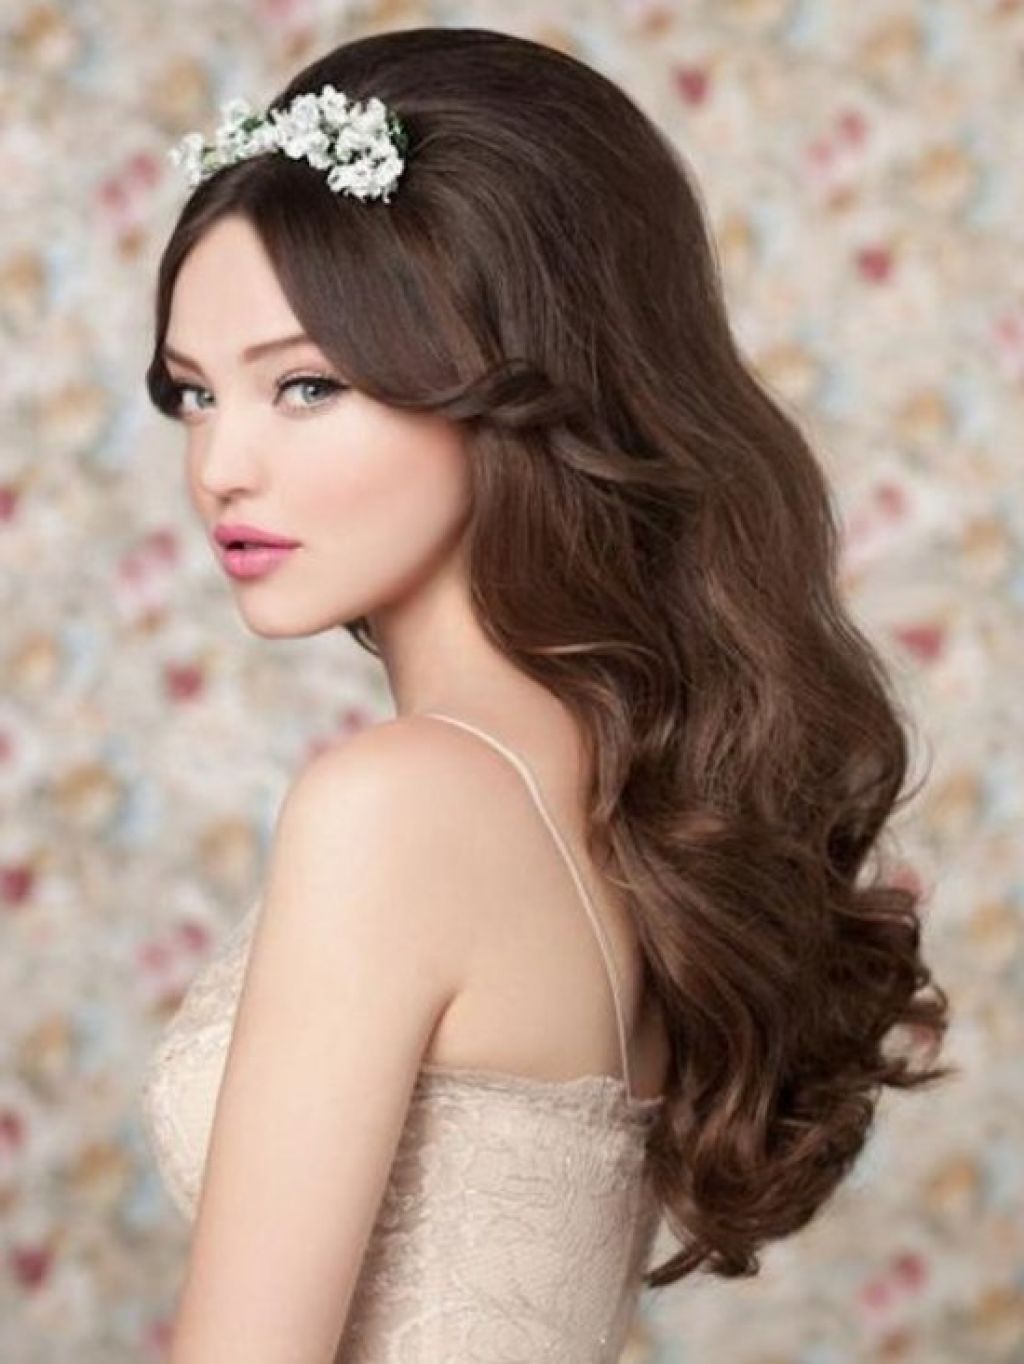 20 Wedding Hairstyle Long Hair You Can Do At Home - MagMent